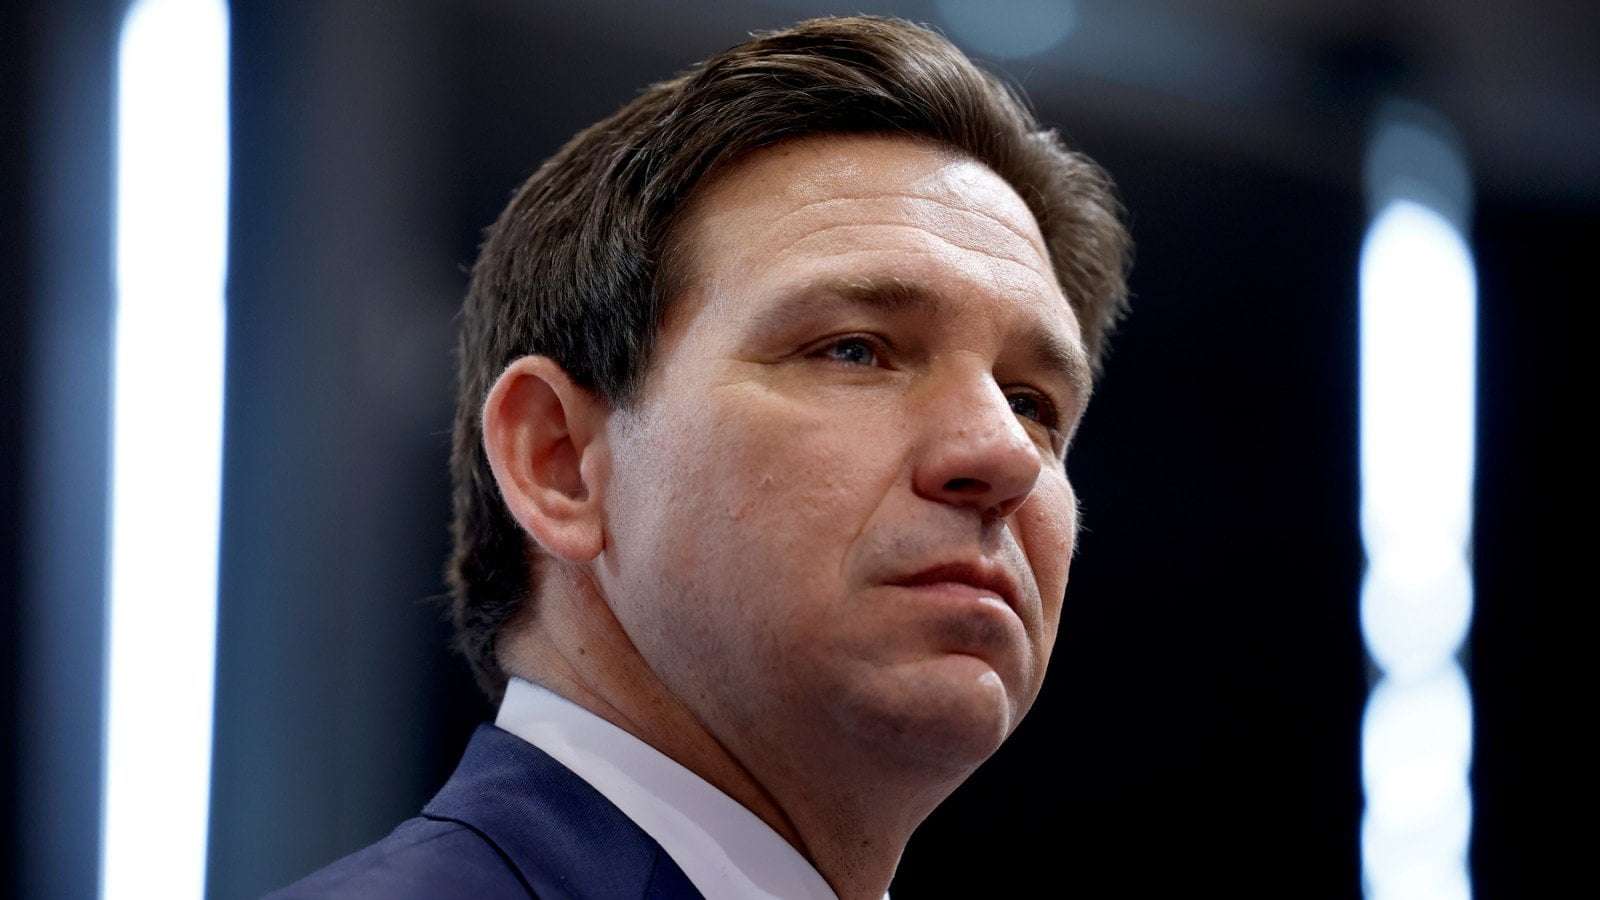 image for DeSantis Flops in Iowa, Whines About ‘Election Interference’